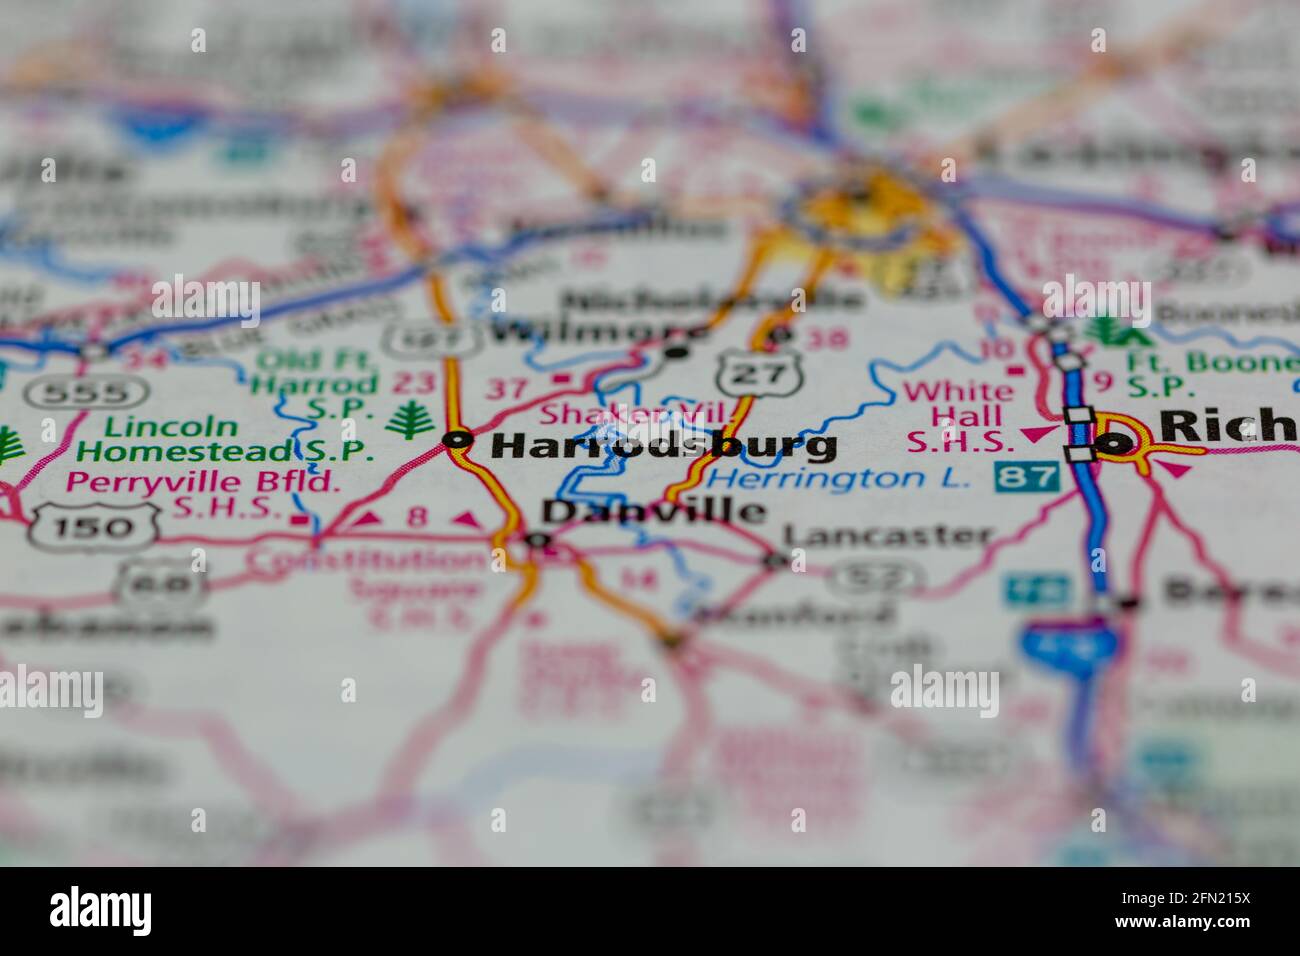 Harrodsburg Kentucky USA shown on a Geography map or road map Stock Photo image